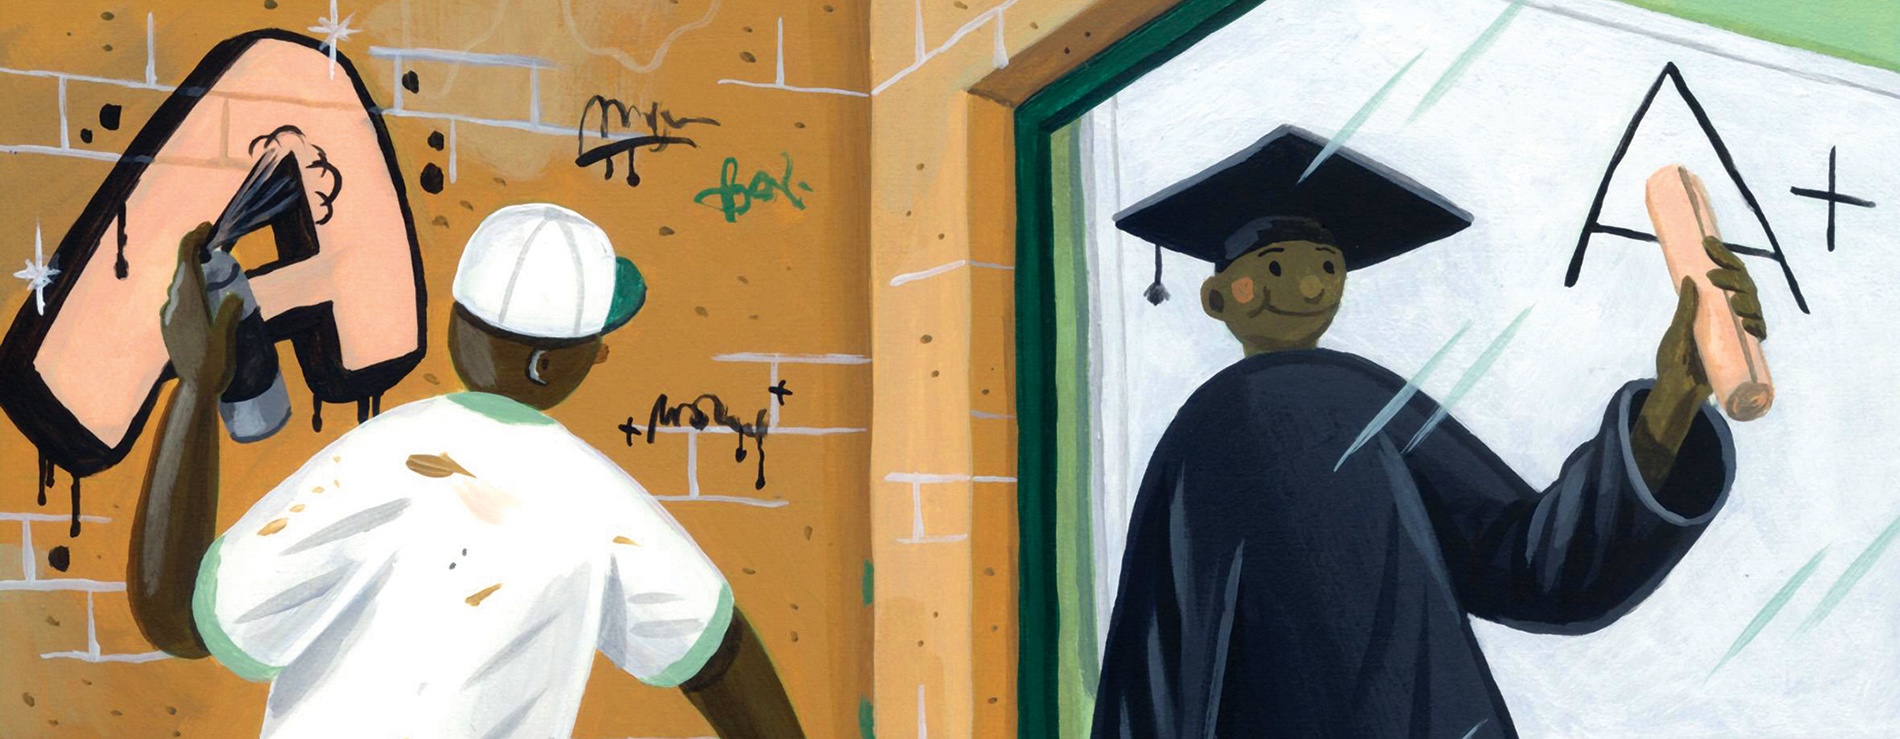 Illustration of a young man spraypainting an "A" on a wall, looking through a plate glass window at a seemingly identical young man in a cap and gown, holding up a diploma, with an "A+" seen on a whiteboard.